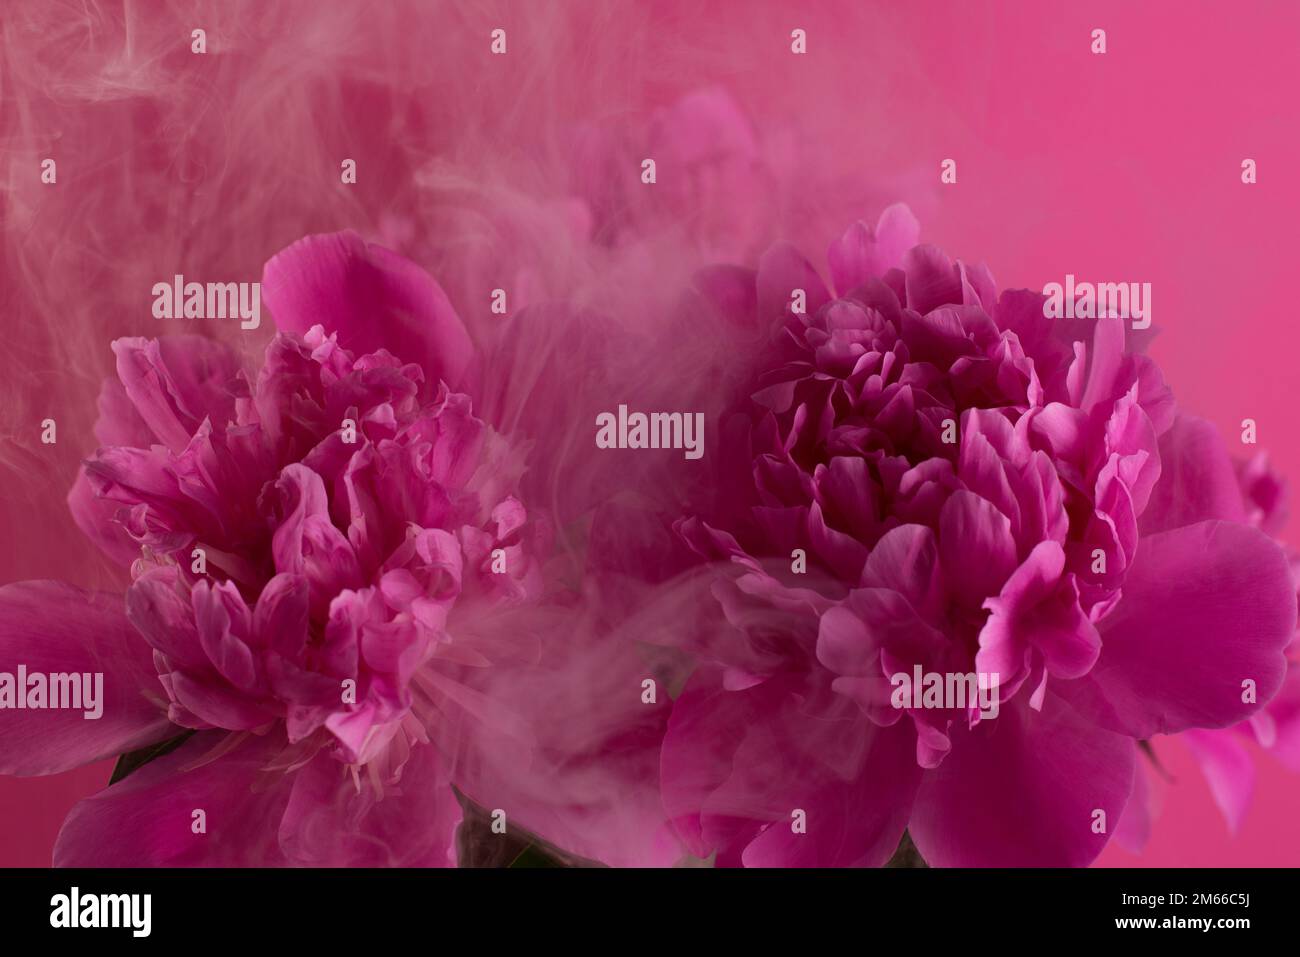 Beautiful bouquet of pink and white Peonies. Floral spring seasonal wallpaper. Close up photography softfocused peony. Stock Photo